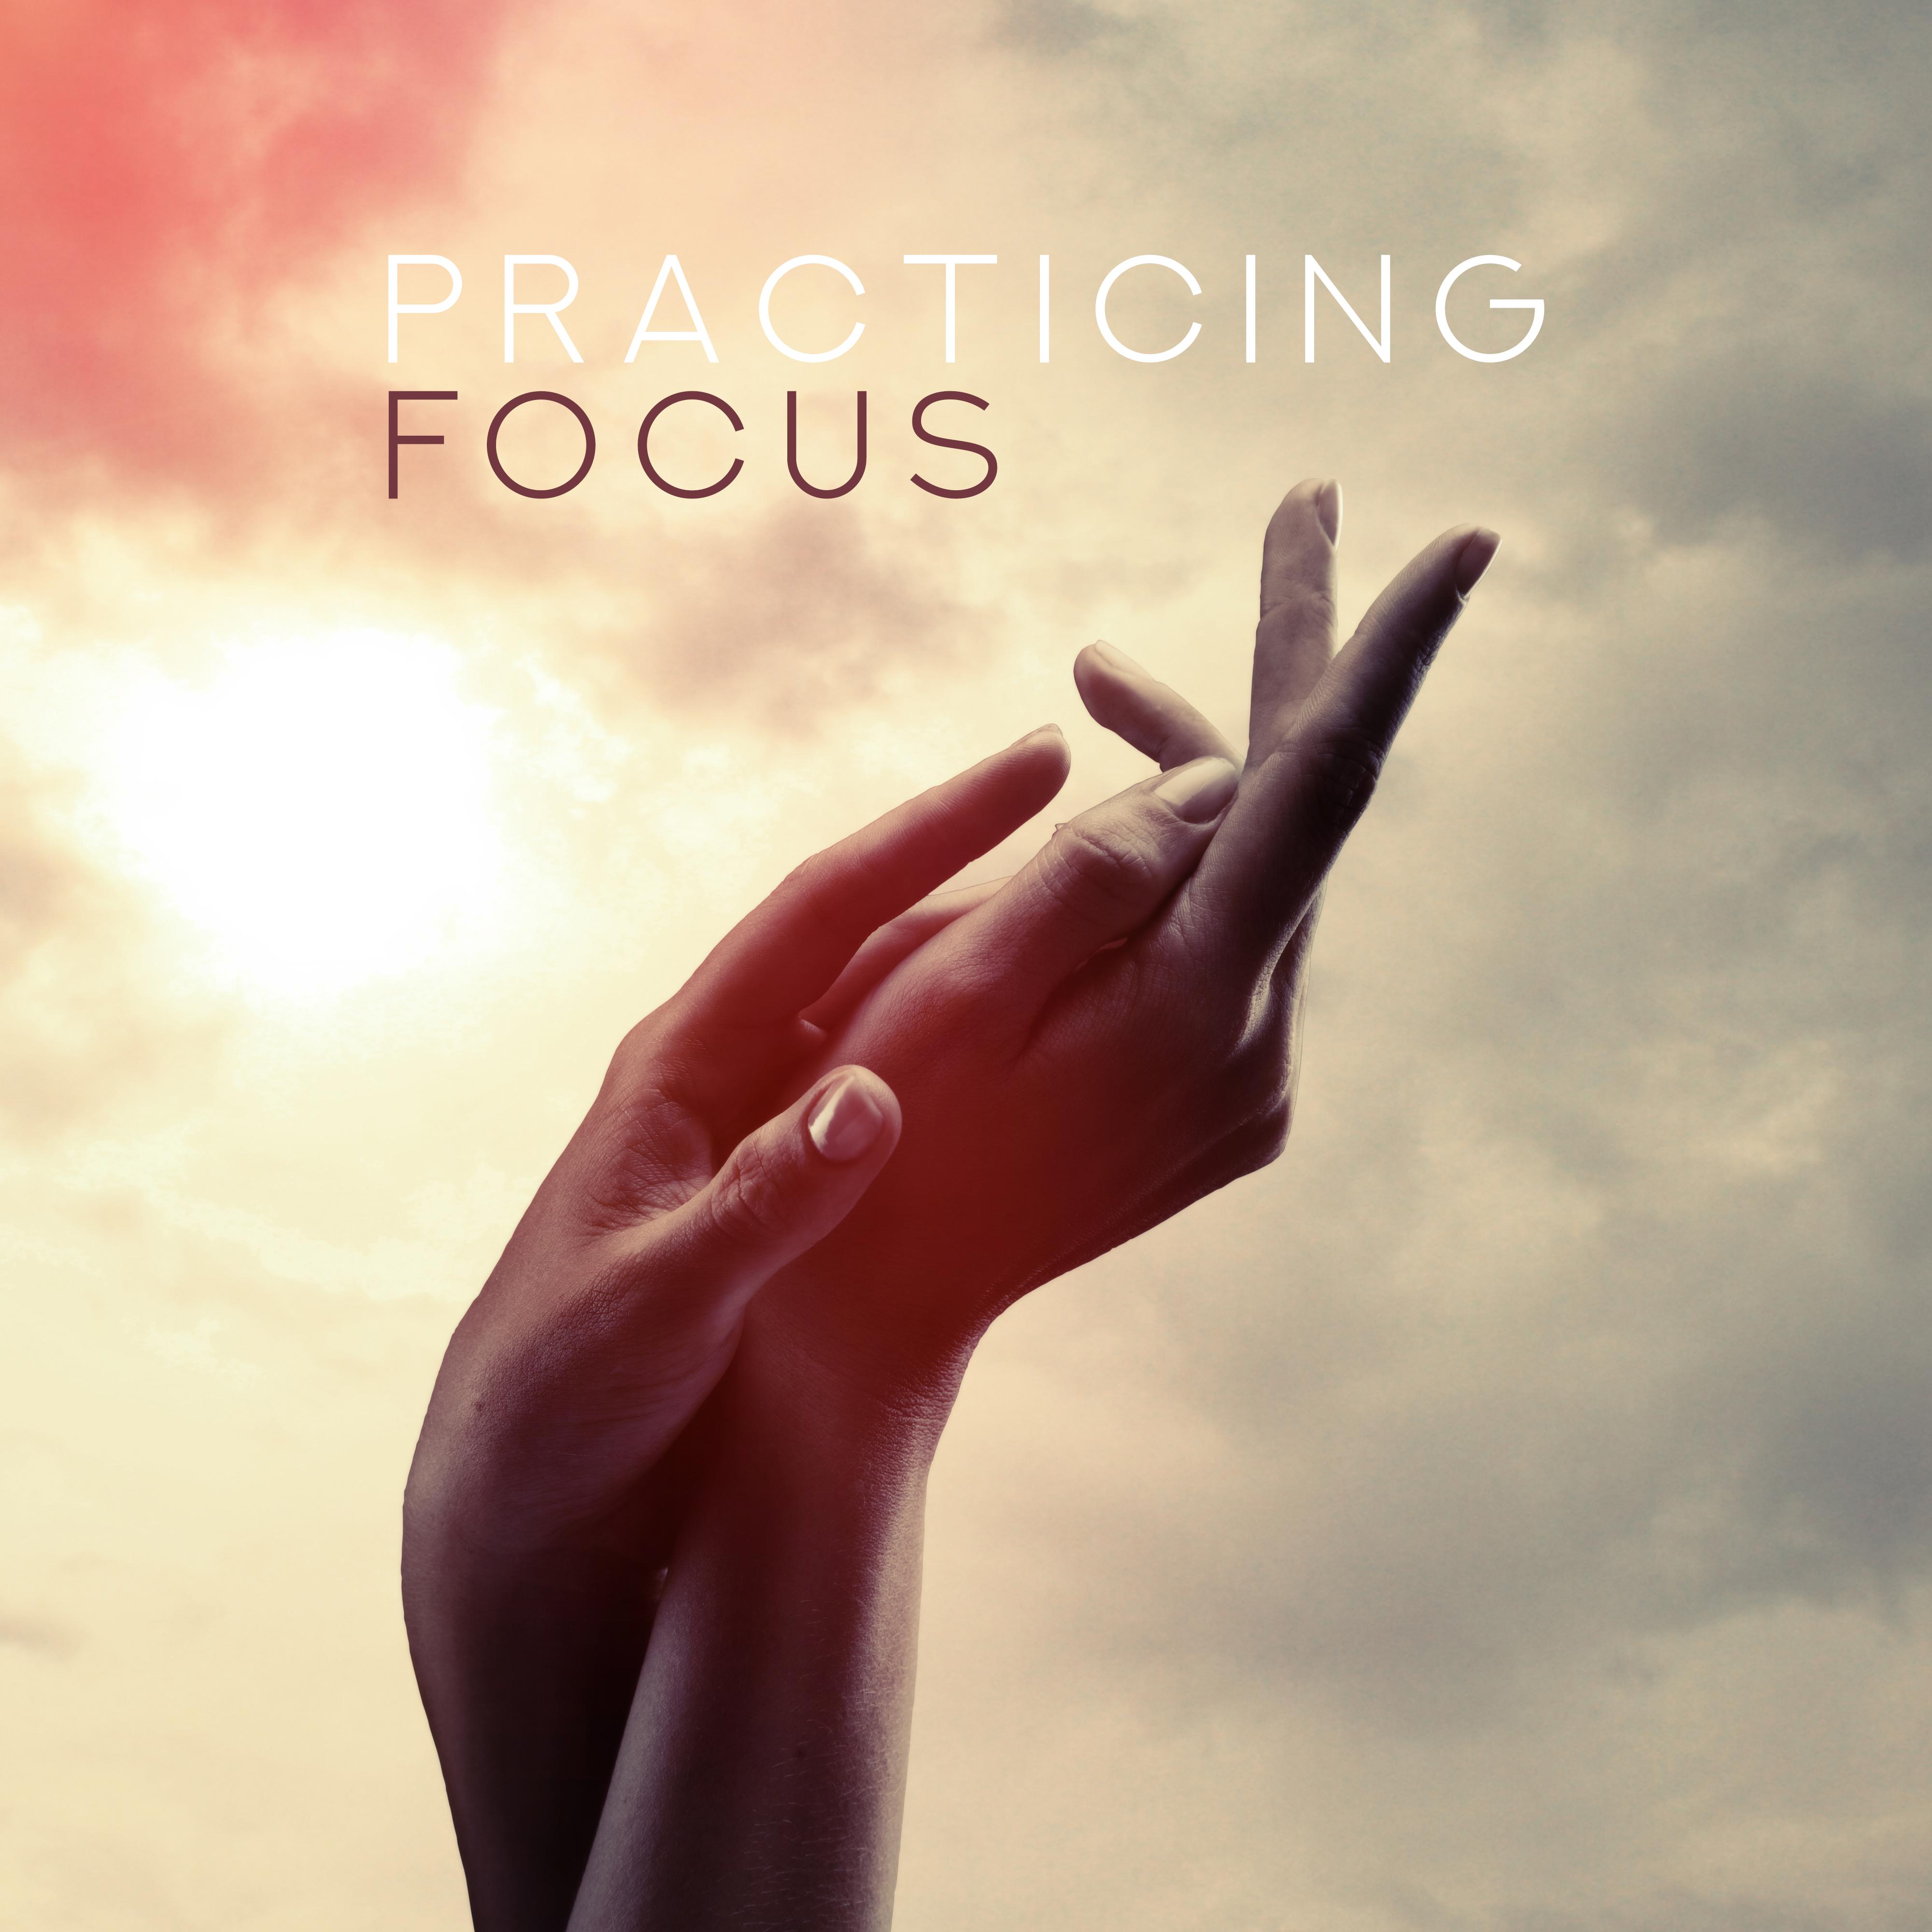 Practicing Focus: Meditation Music Zone, Zen Lounge, Ambient Yoga, Meditation Practice, Calm Vibes, Meditation Zone of Peace, Inner Balance, Relaxation